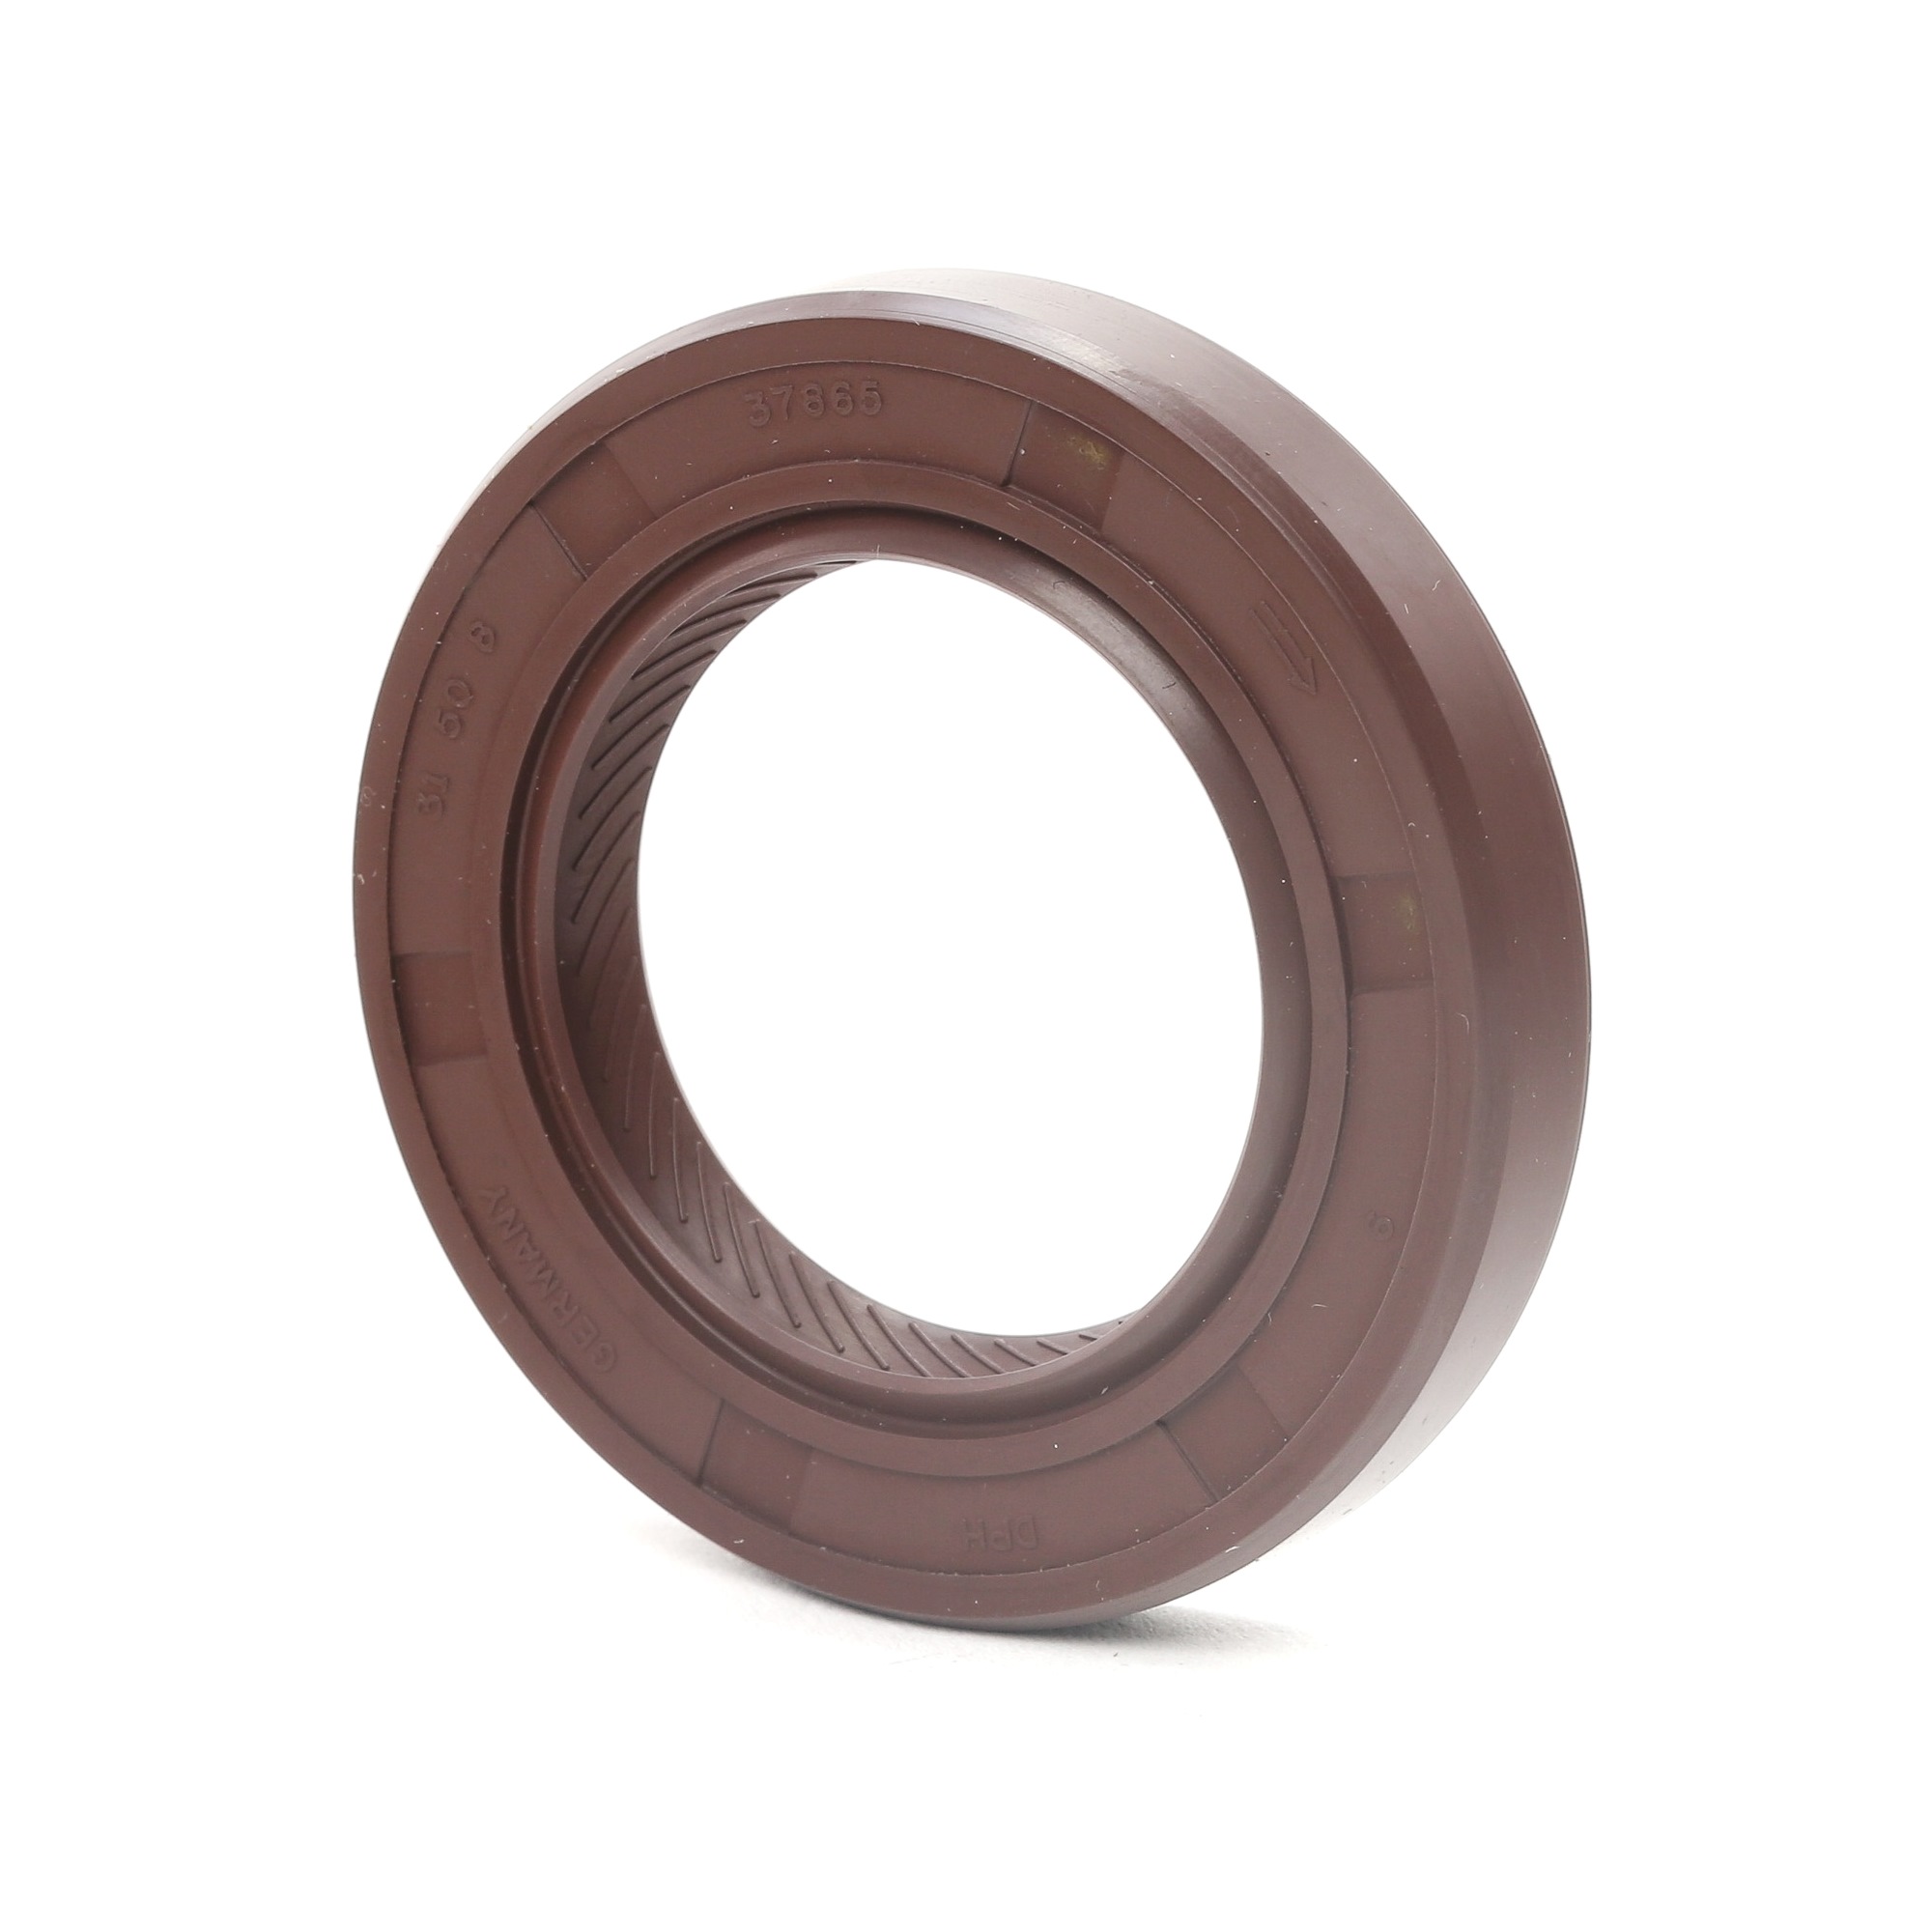 V40-1805 VAICO Crankshaft oil seal OPEL Q+, original equipment manufacturer quality MADE IN GERMANY, frontal sided